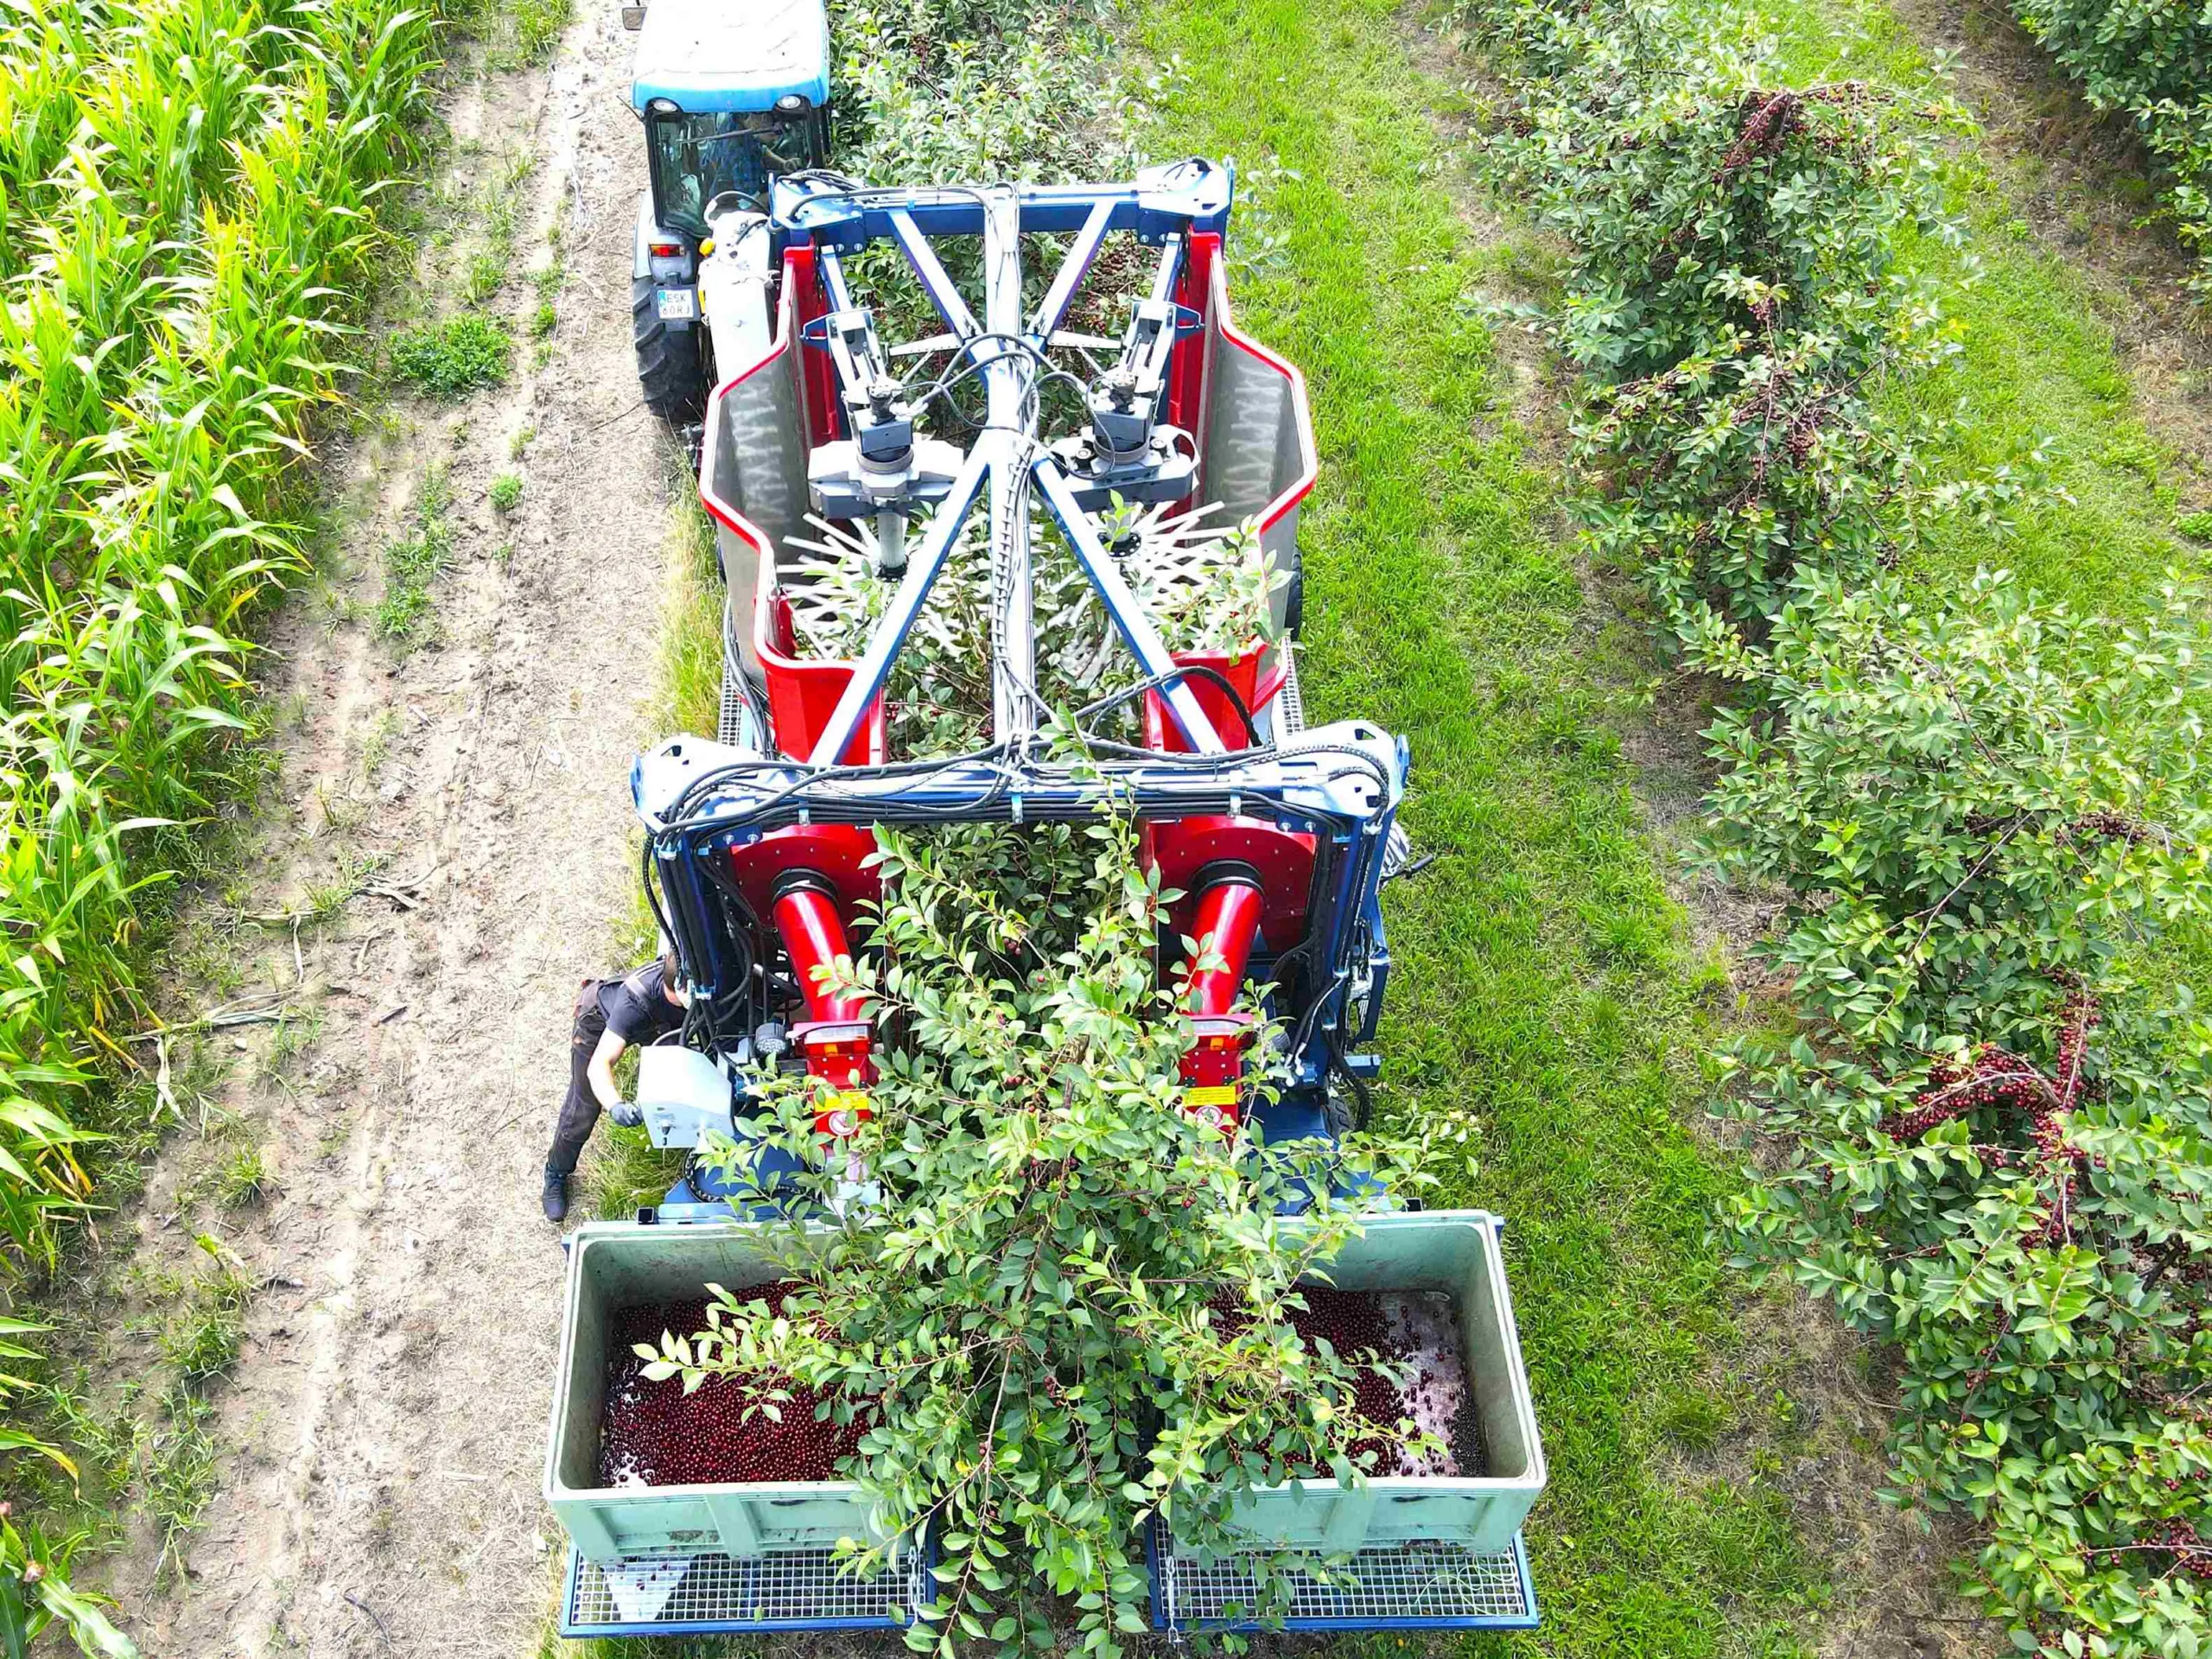 JAGODA 300 cherry harvester with high-capacity fruit boxes offering efficient collection and storage.